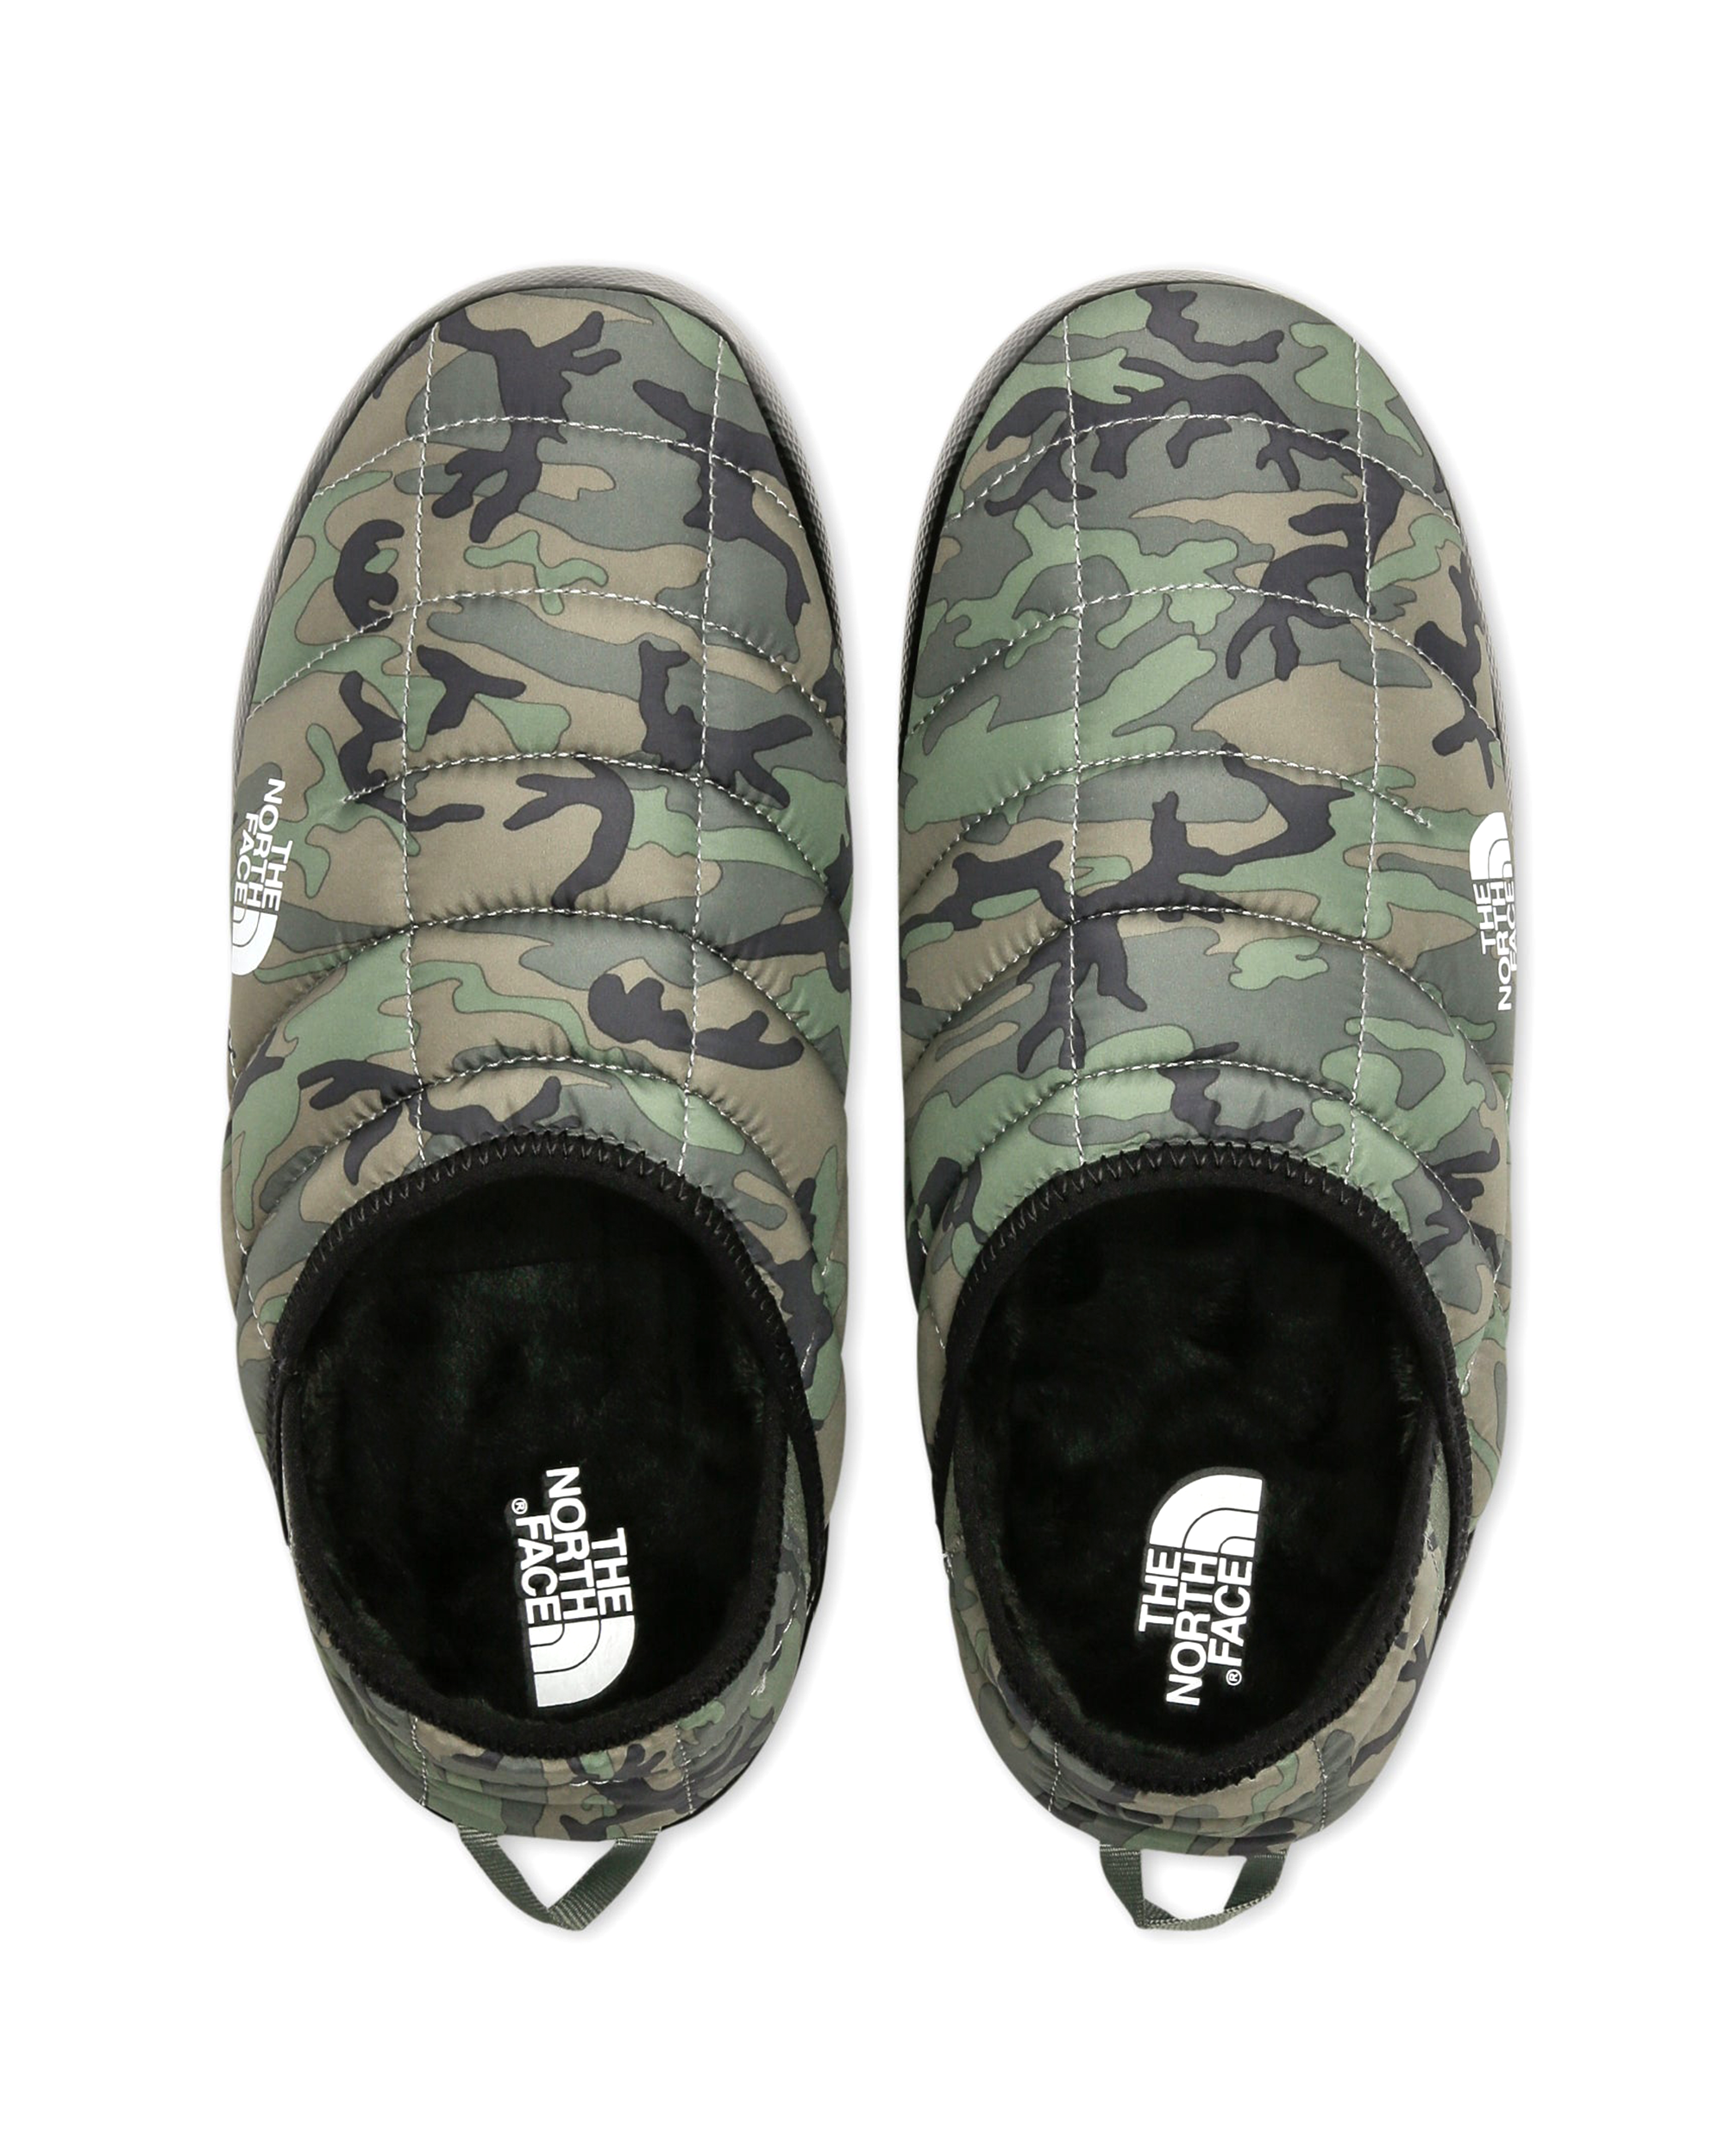 Thermoball Traction V Mule - Thyme Camo / Black